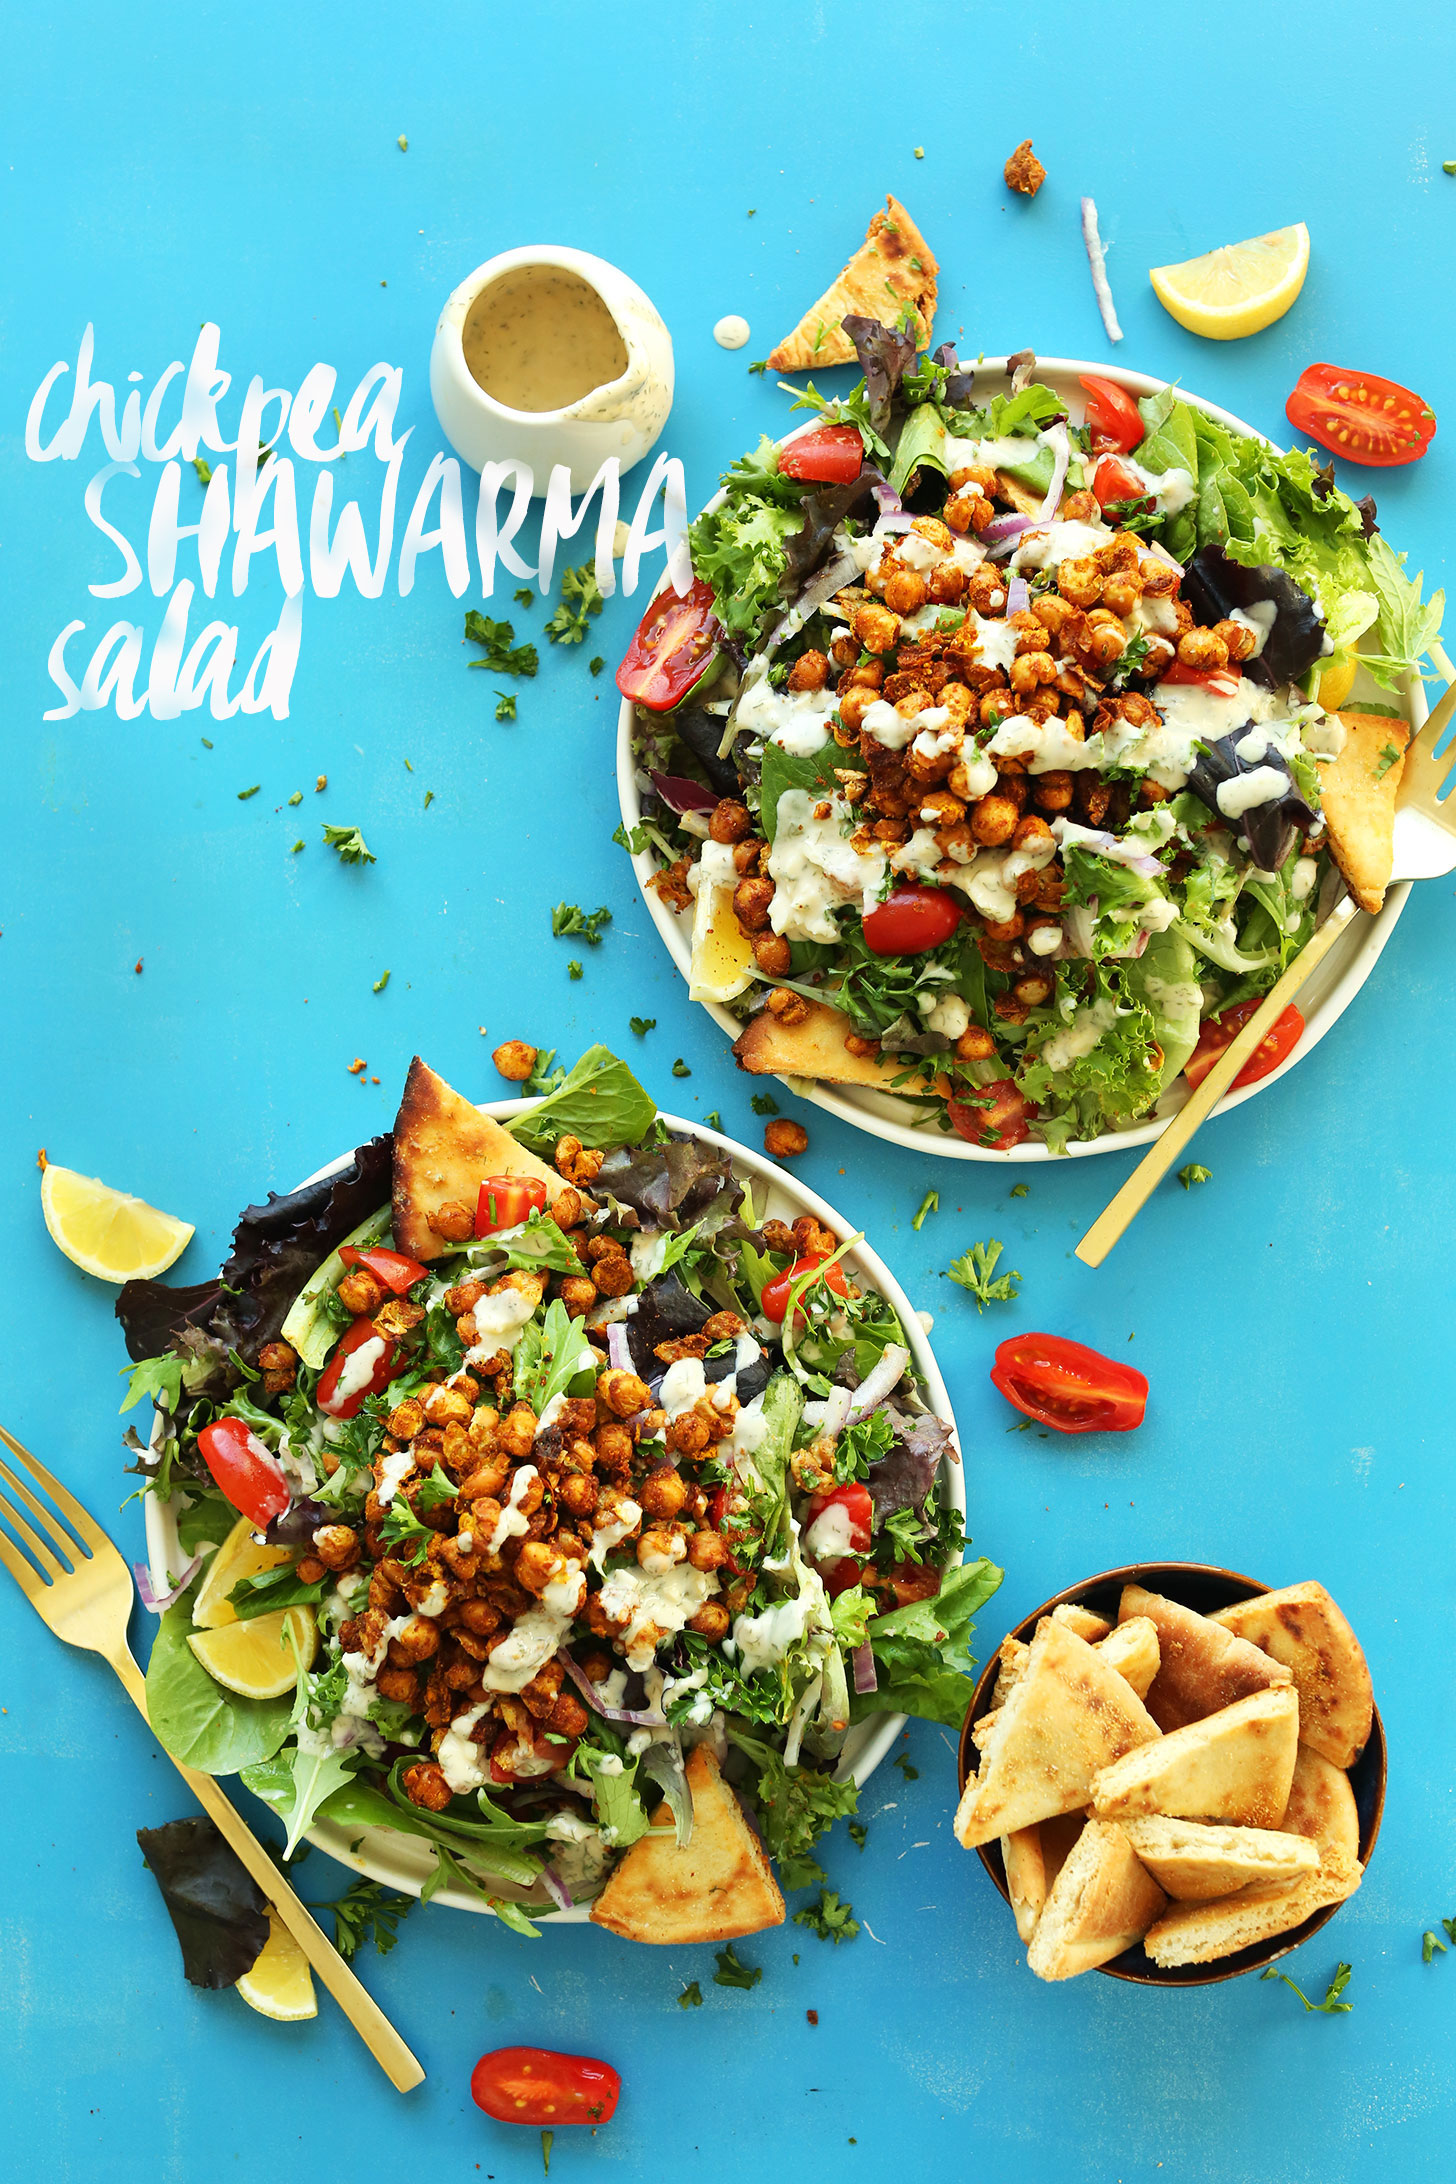 Two big dinner plates filled with our quick and delicious Chickpea Shawarma Salad recipe